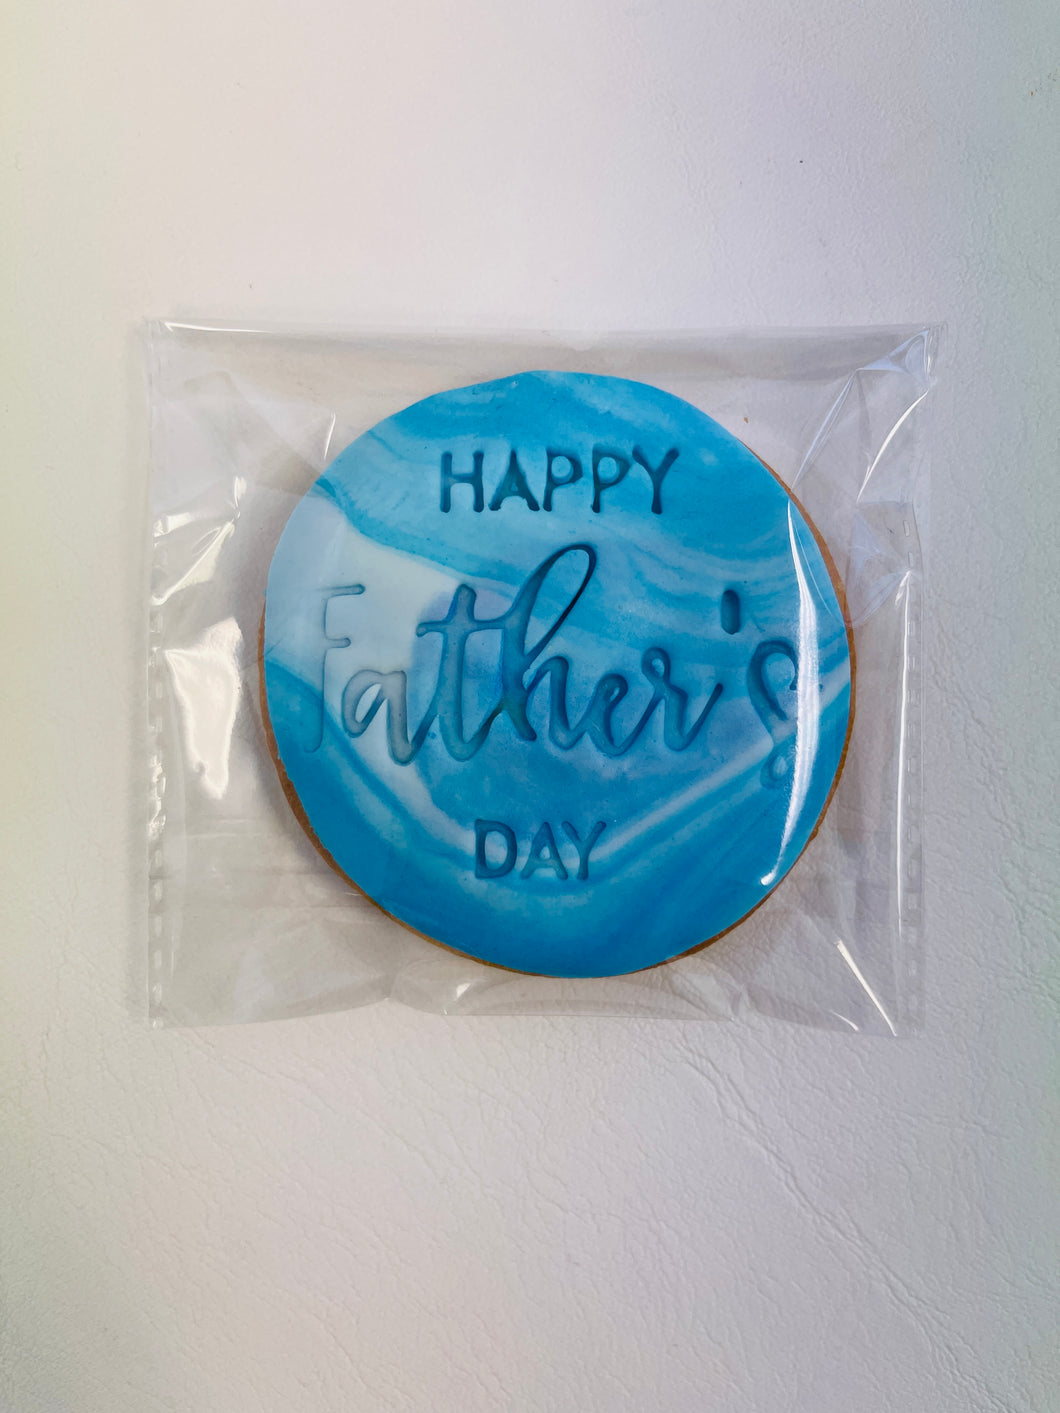 Father's Day Cookie